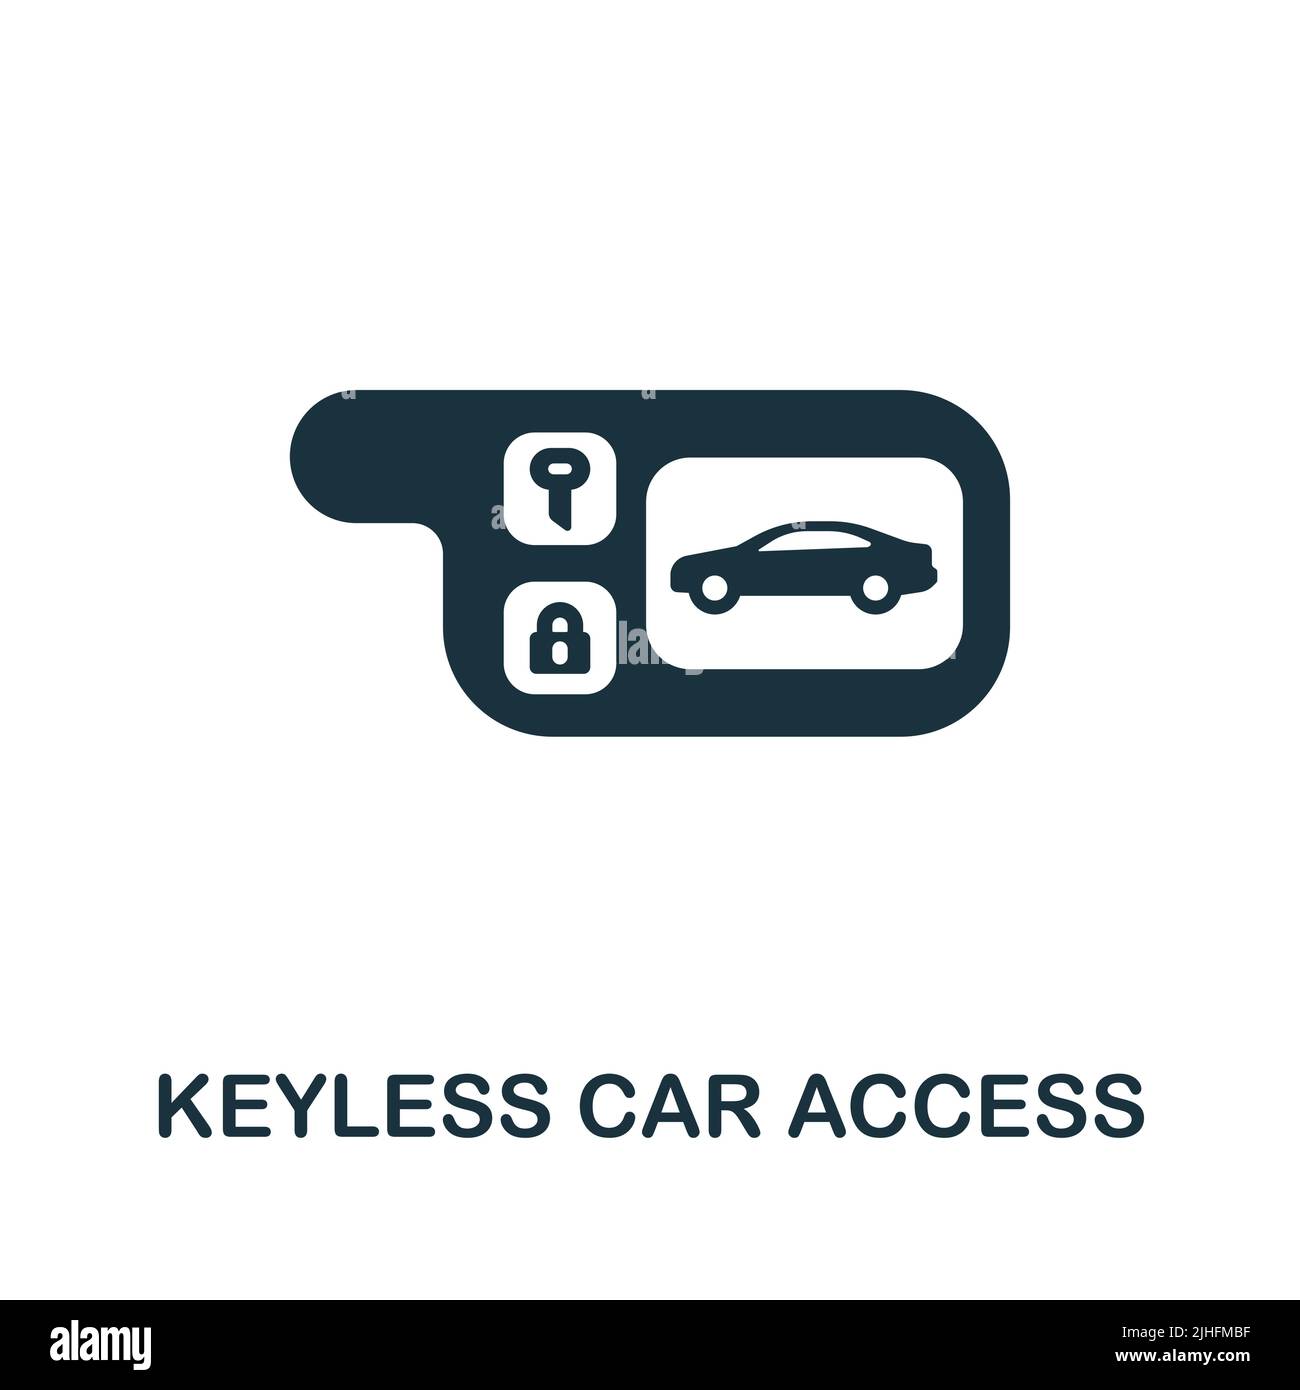 Keyless Car Access icon. Monochrome simple line Car Service icon for templates, web design and infographics Stock Vector